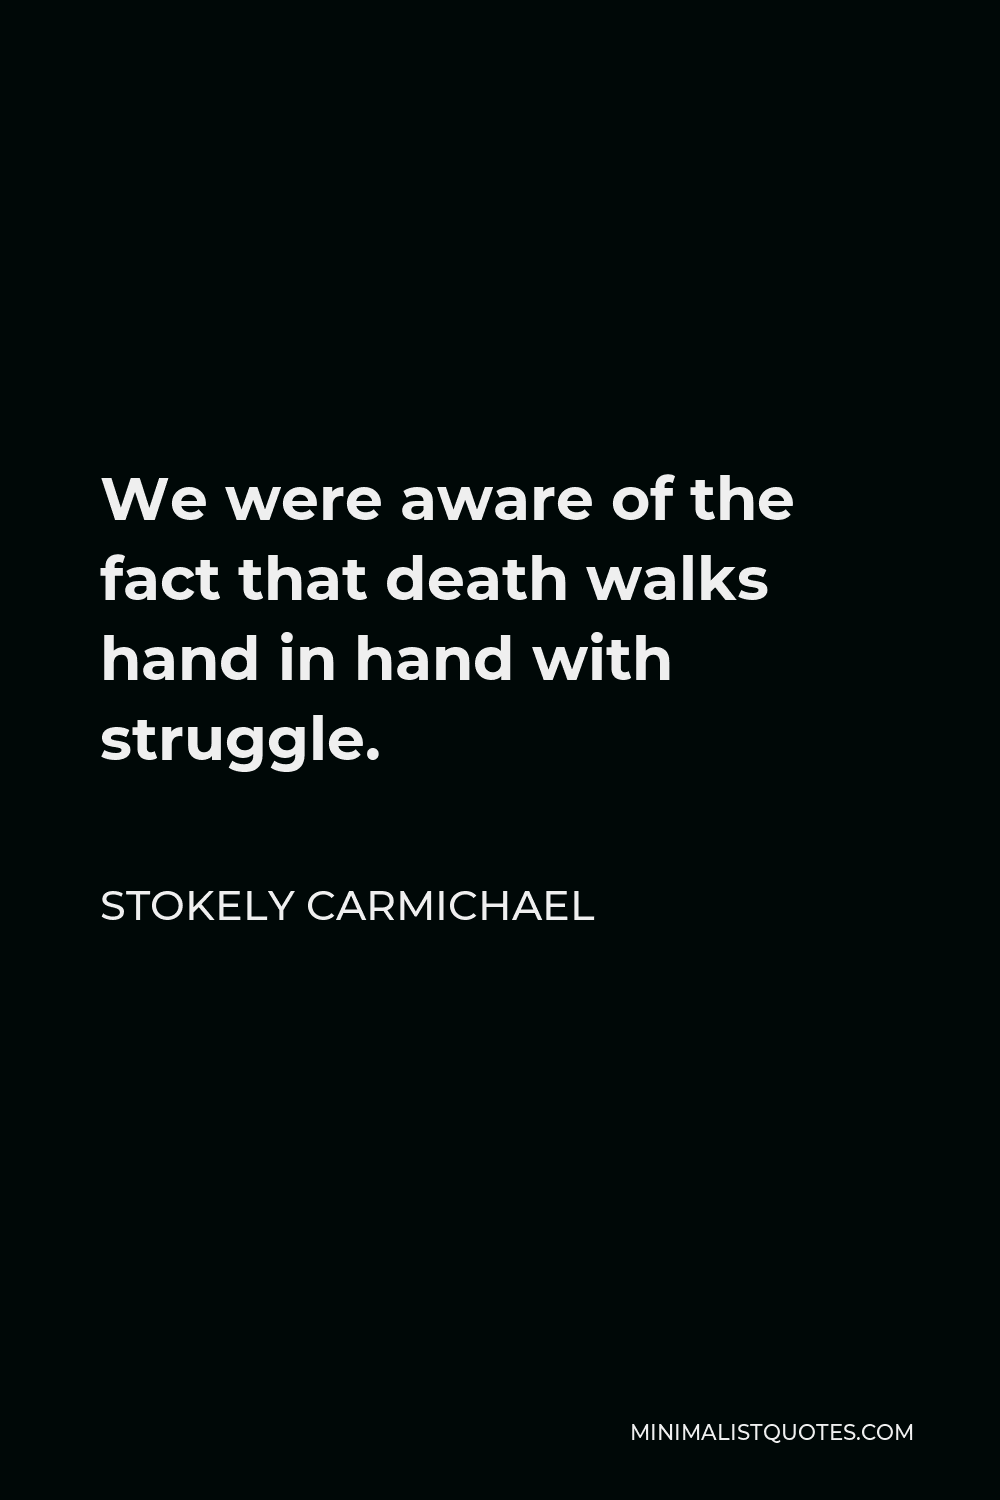 Stokely Carmichael Quote - We were aware of the fact that death walks hand in hand with struggle.